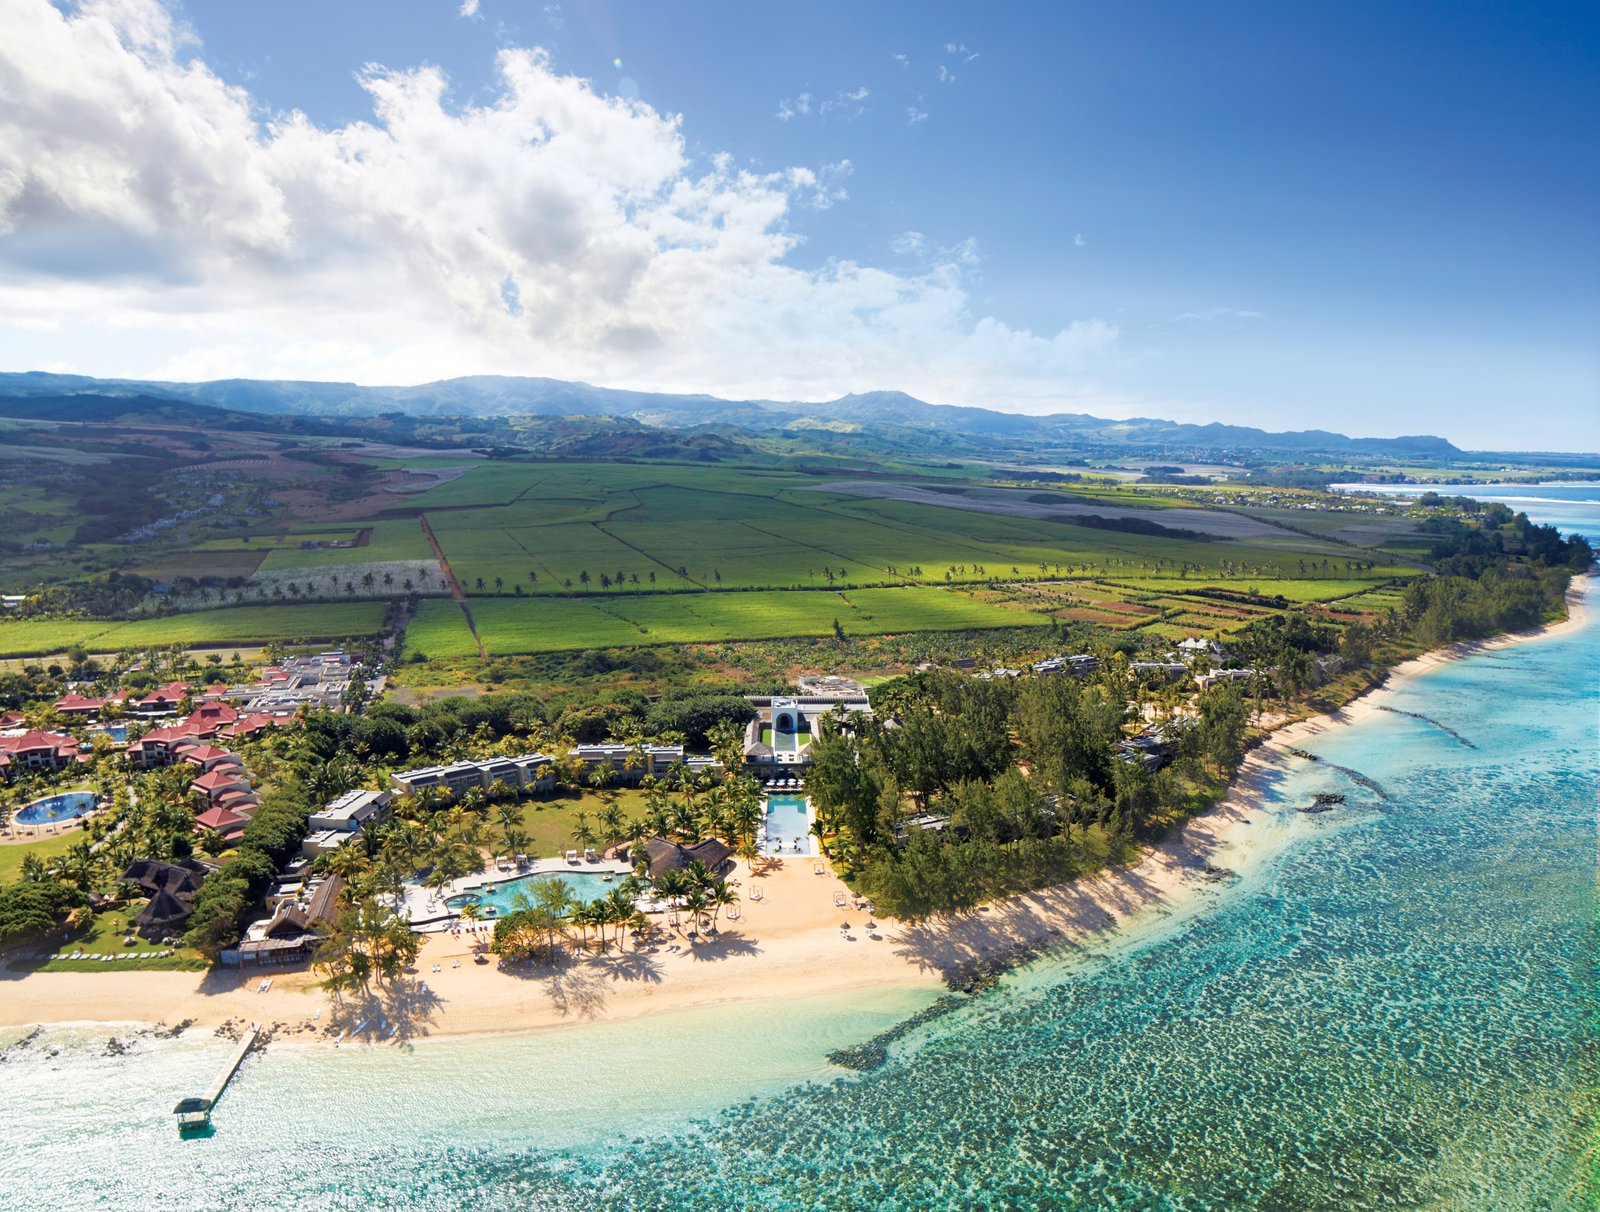 Outrigger is First Hospitality Company to Pursue Green Seal Certification in Mauritius, Fiji and Hawaii